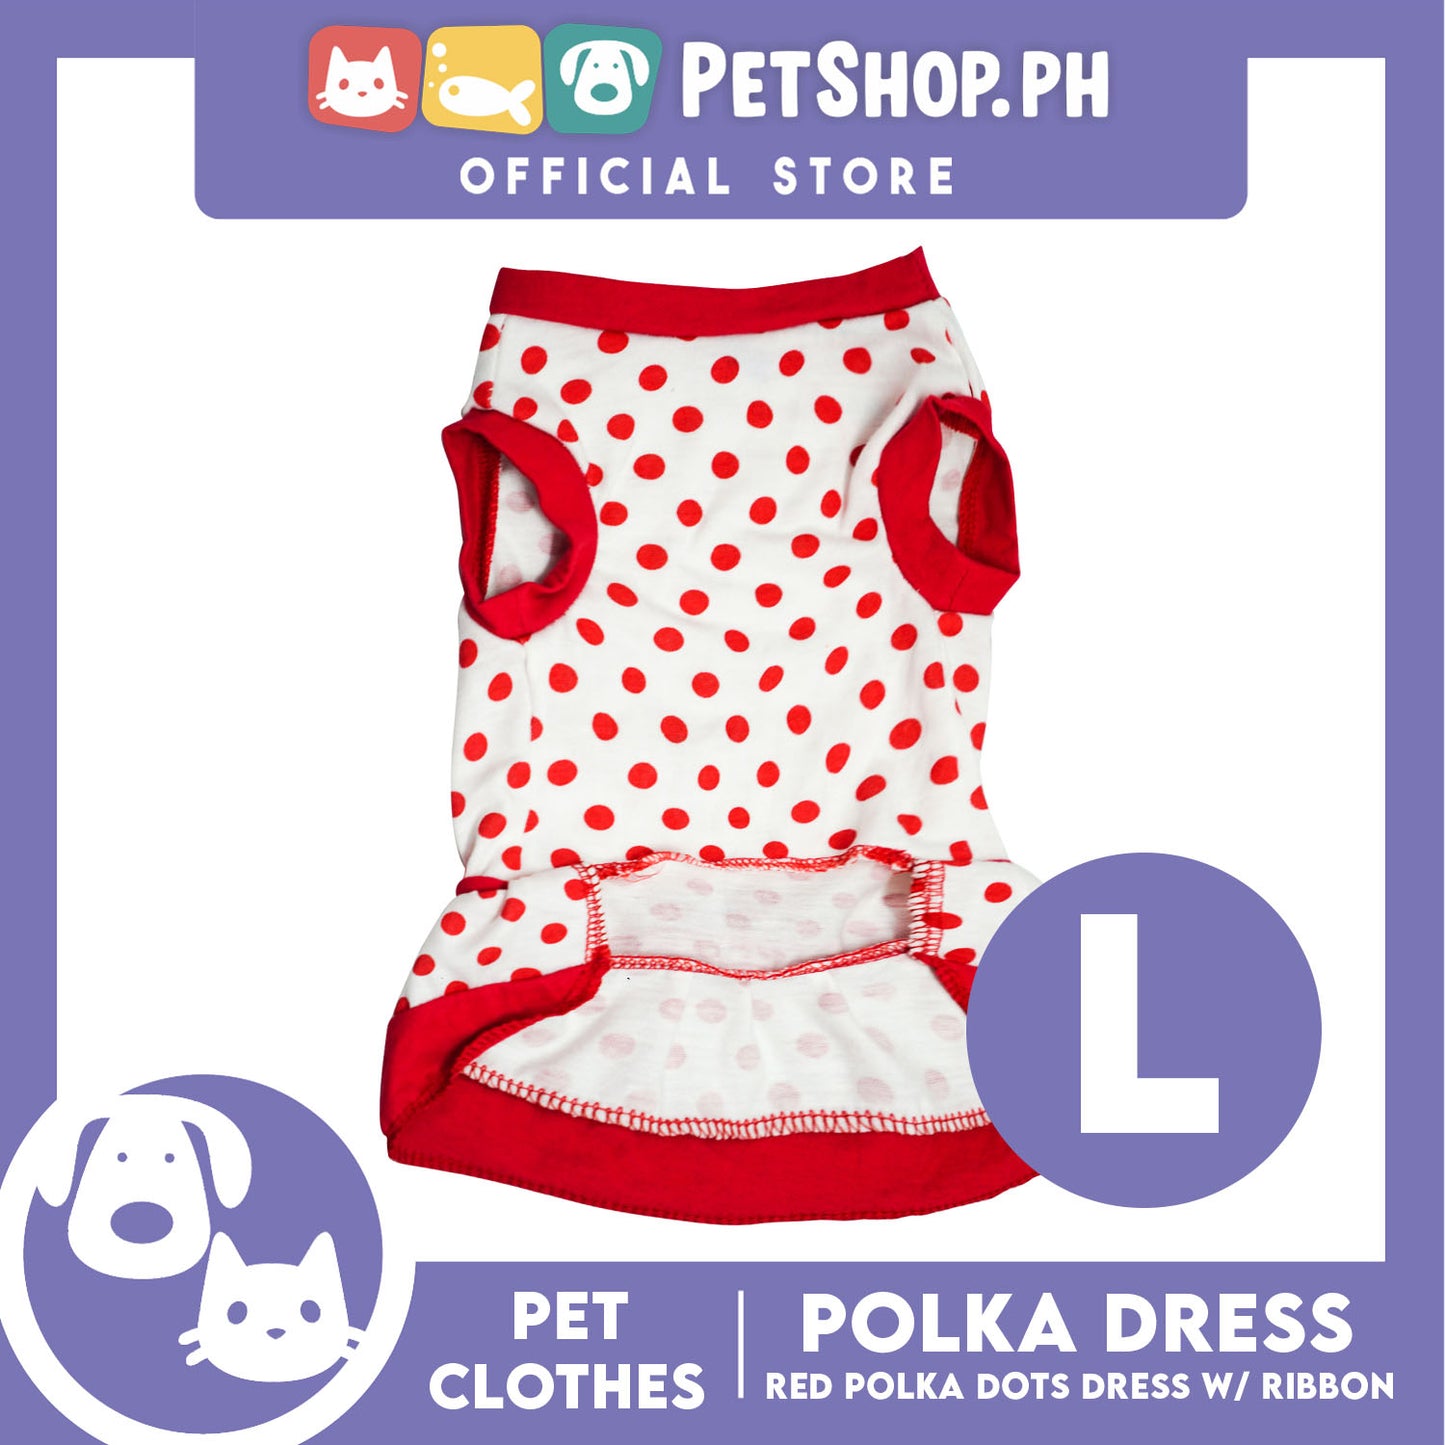 Pet Clothes Red Polka Dress with Red Ribbon Design (Large) Shirt for Dogs and Cats